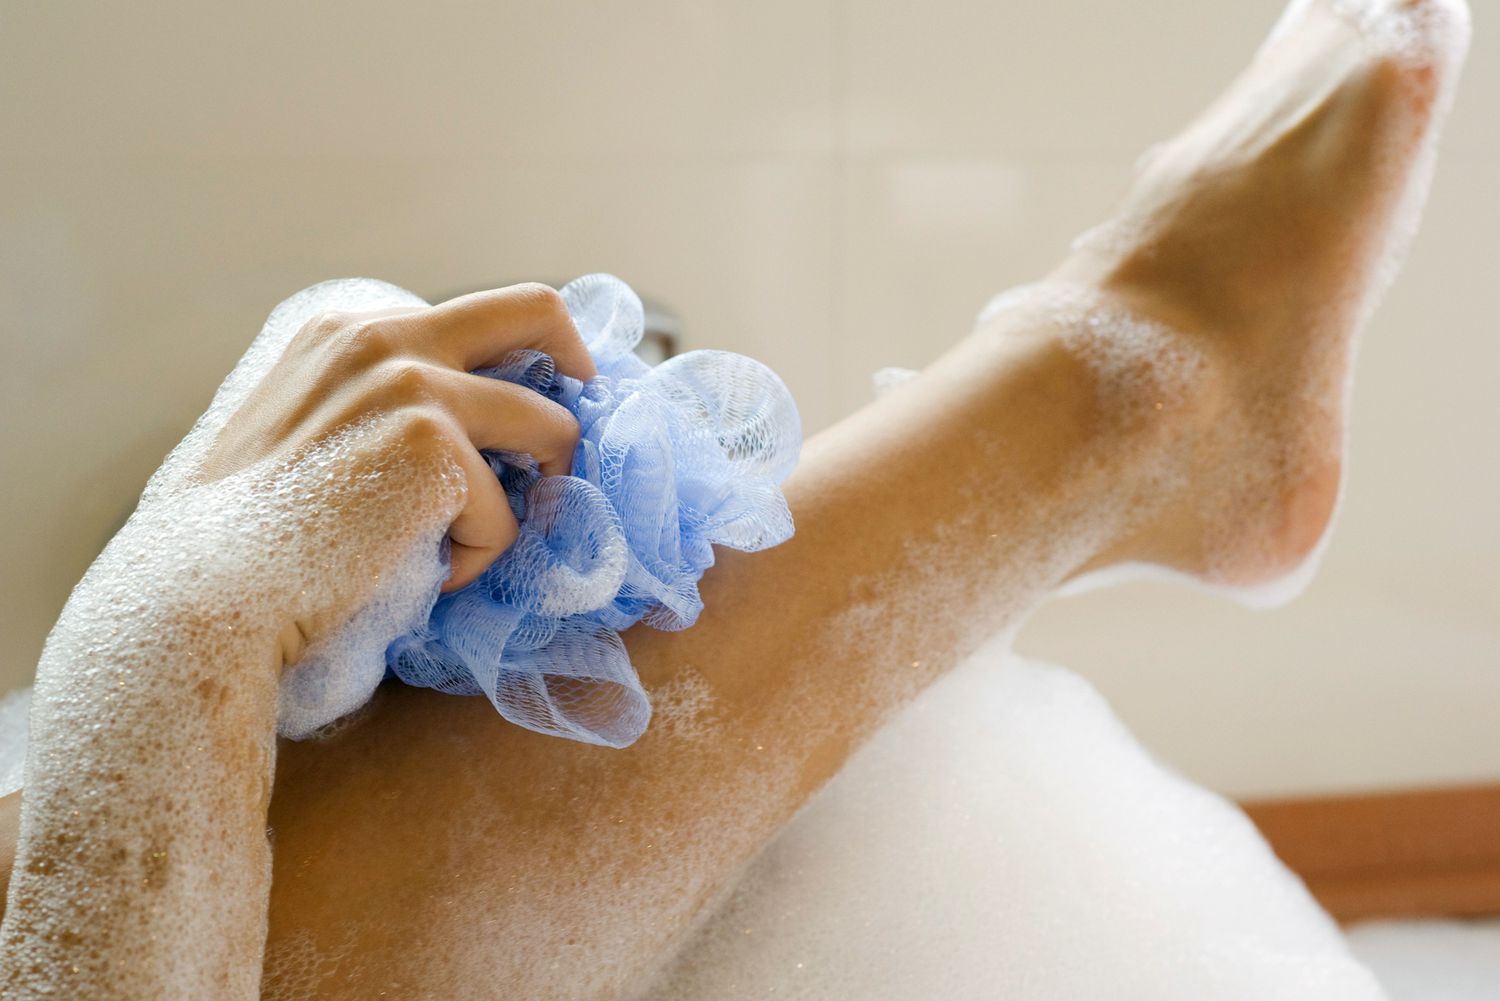 How to Clean Your Loofah